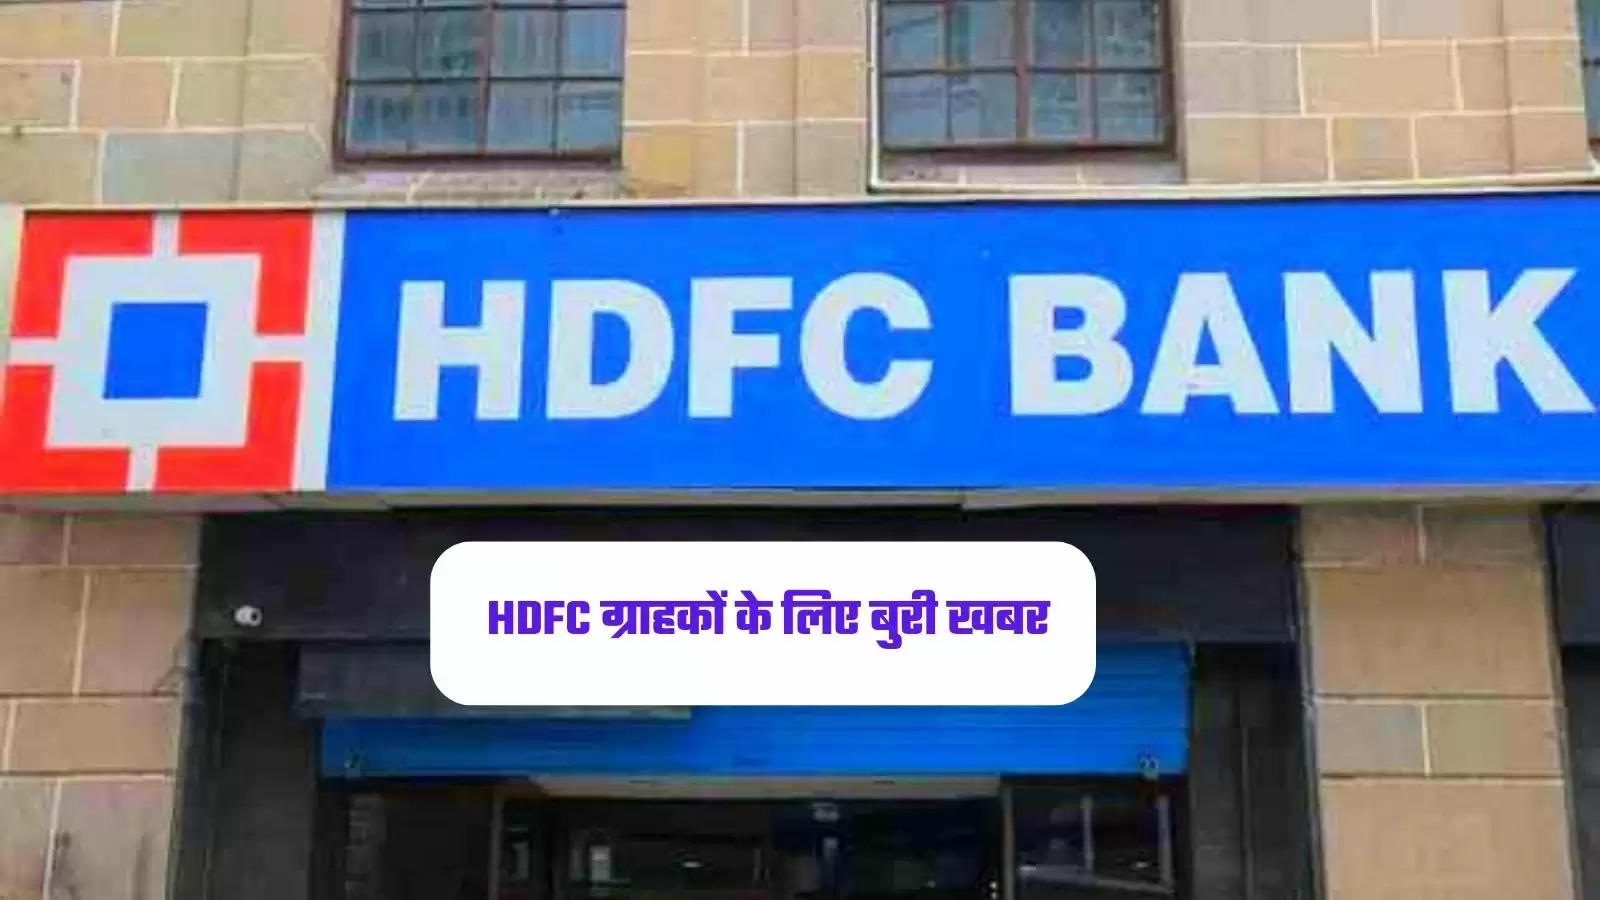 HDFC Bank Scam In Neemuch